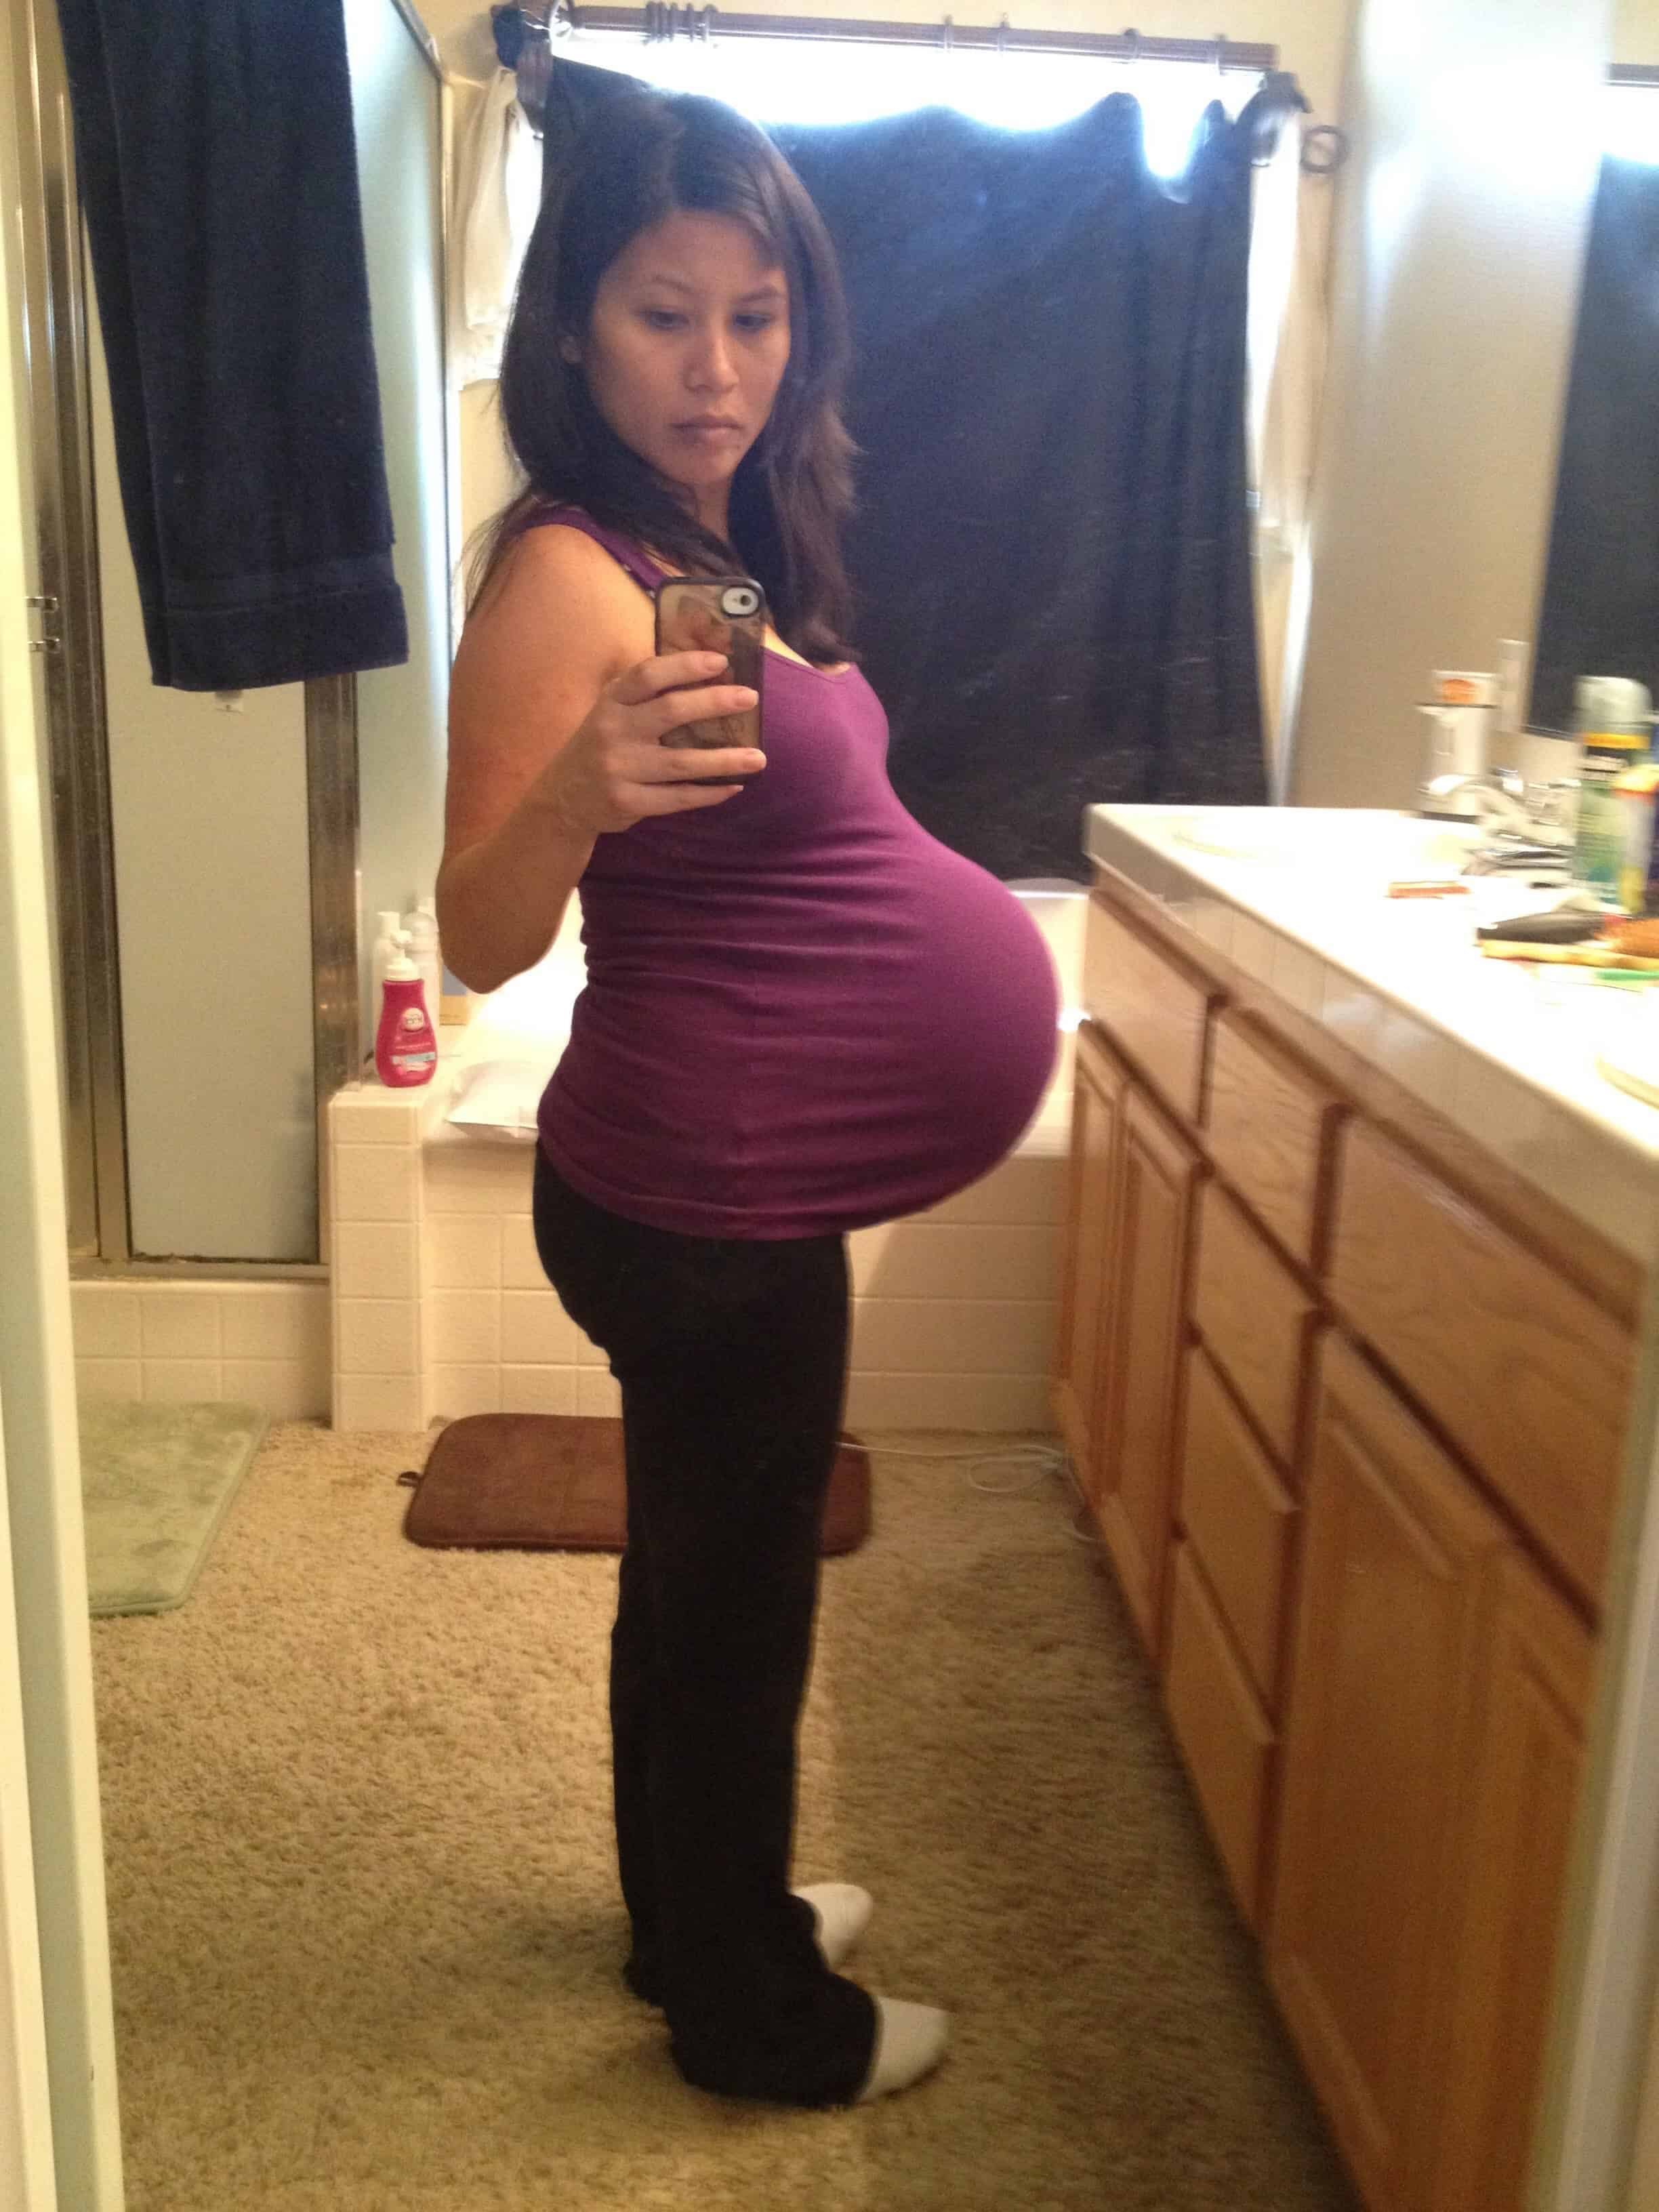 36 weeks pregnant with twins